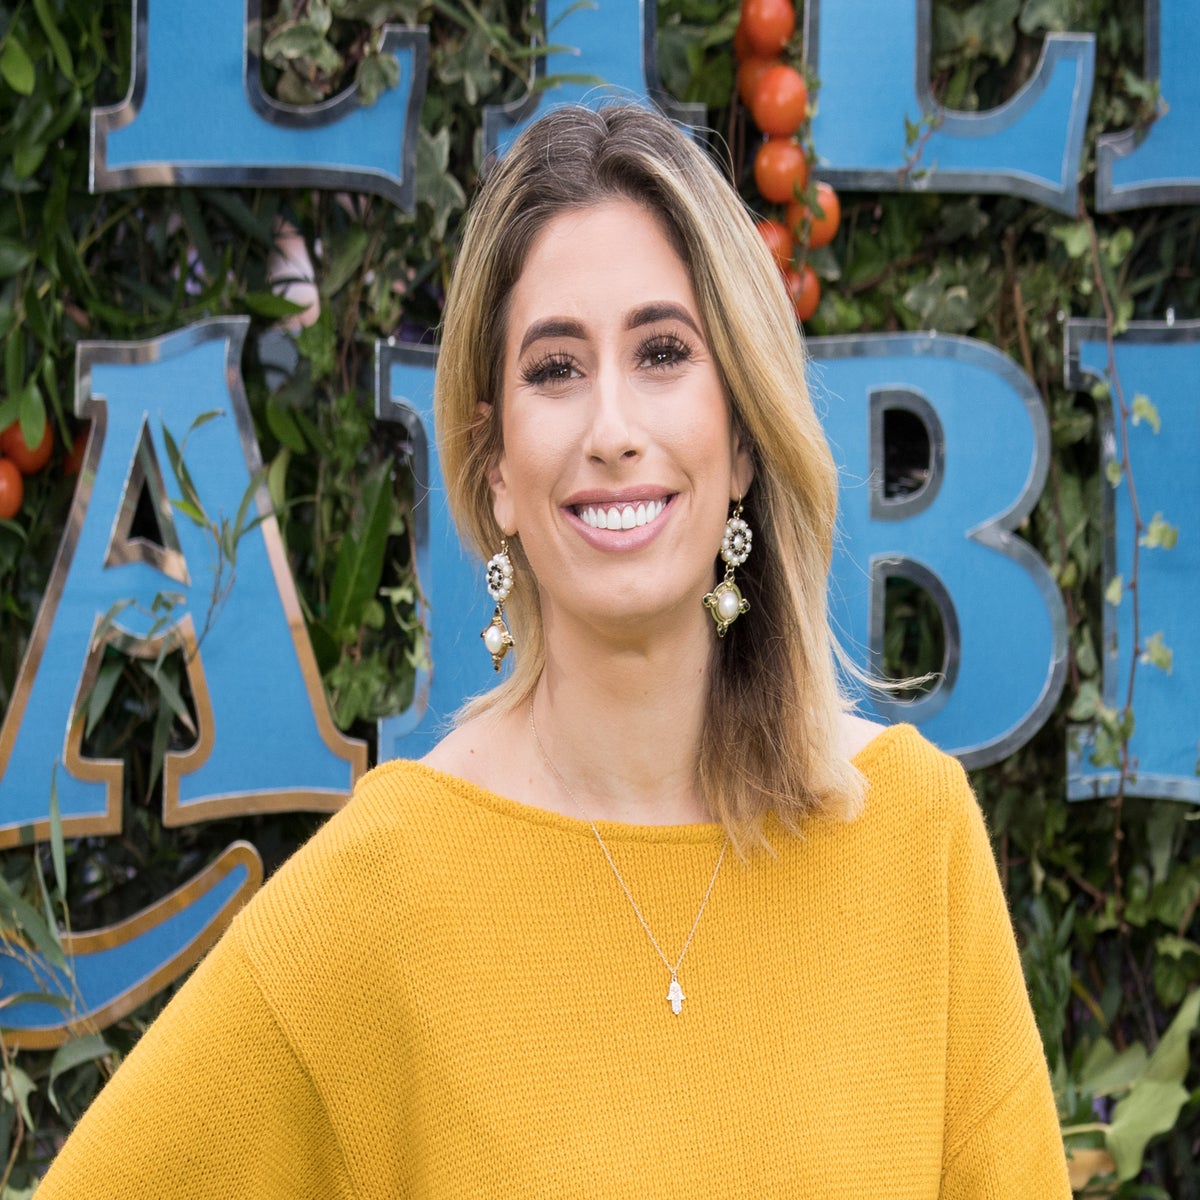 Stacey Solomon says British people shouldn't be forced to give their money  to the Royal